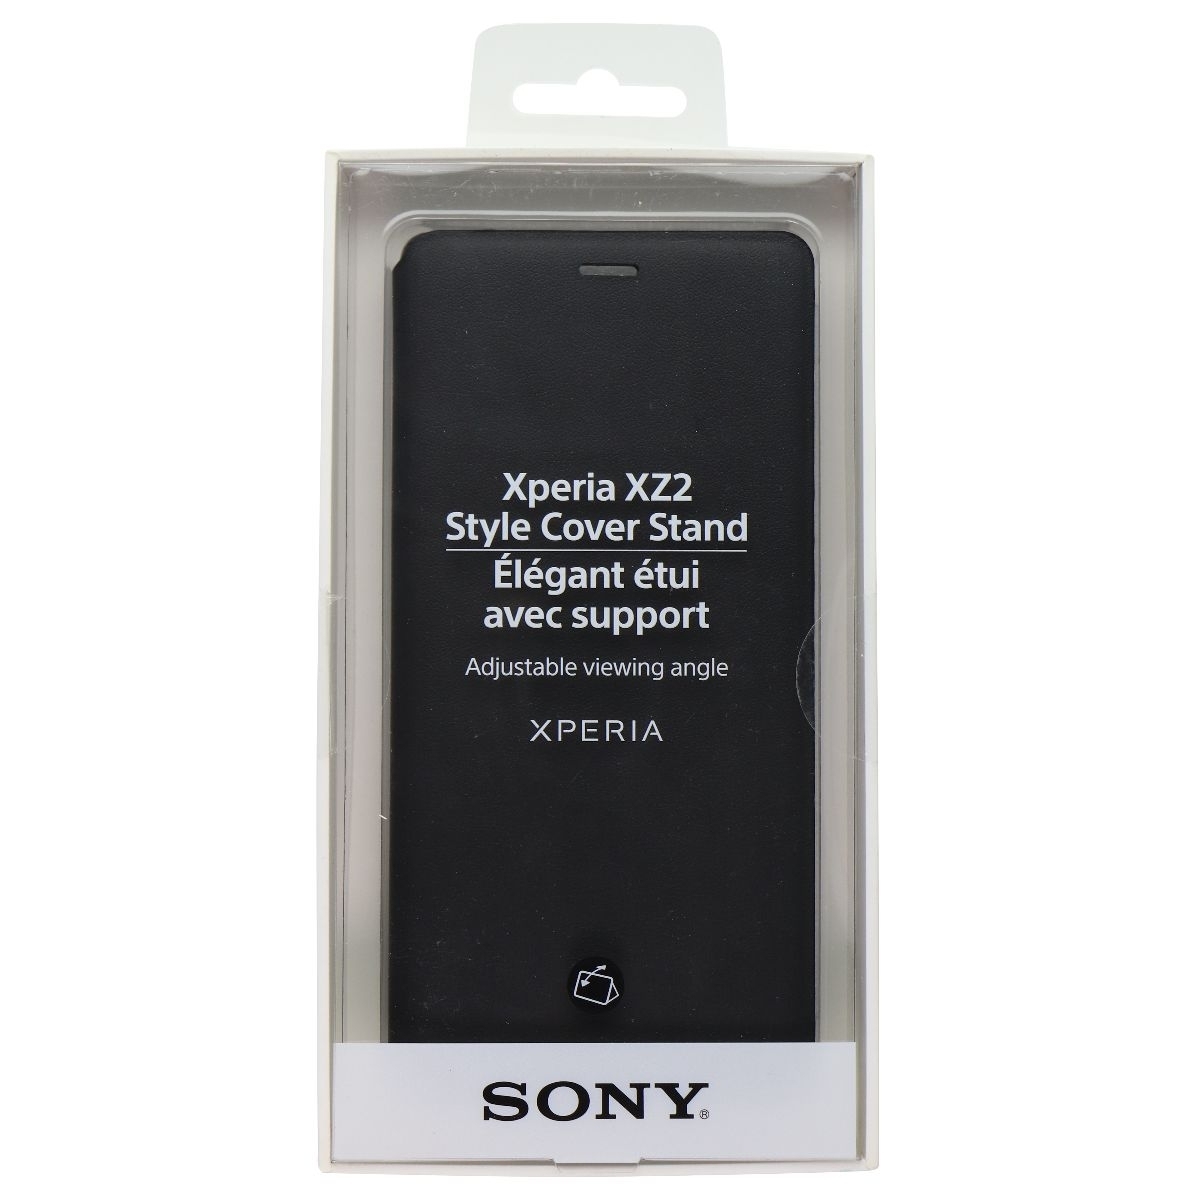 Sony Official Style Cover Stand Case For Sony Xperia XZ2 - Black (Refurbished)